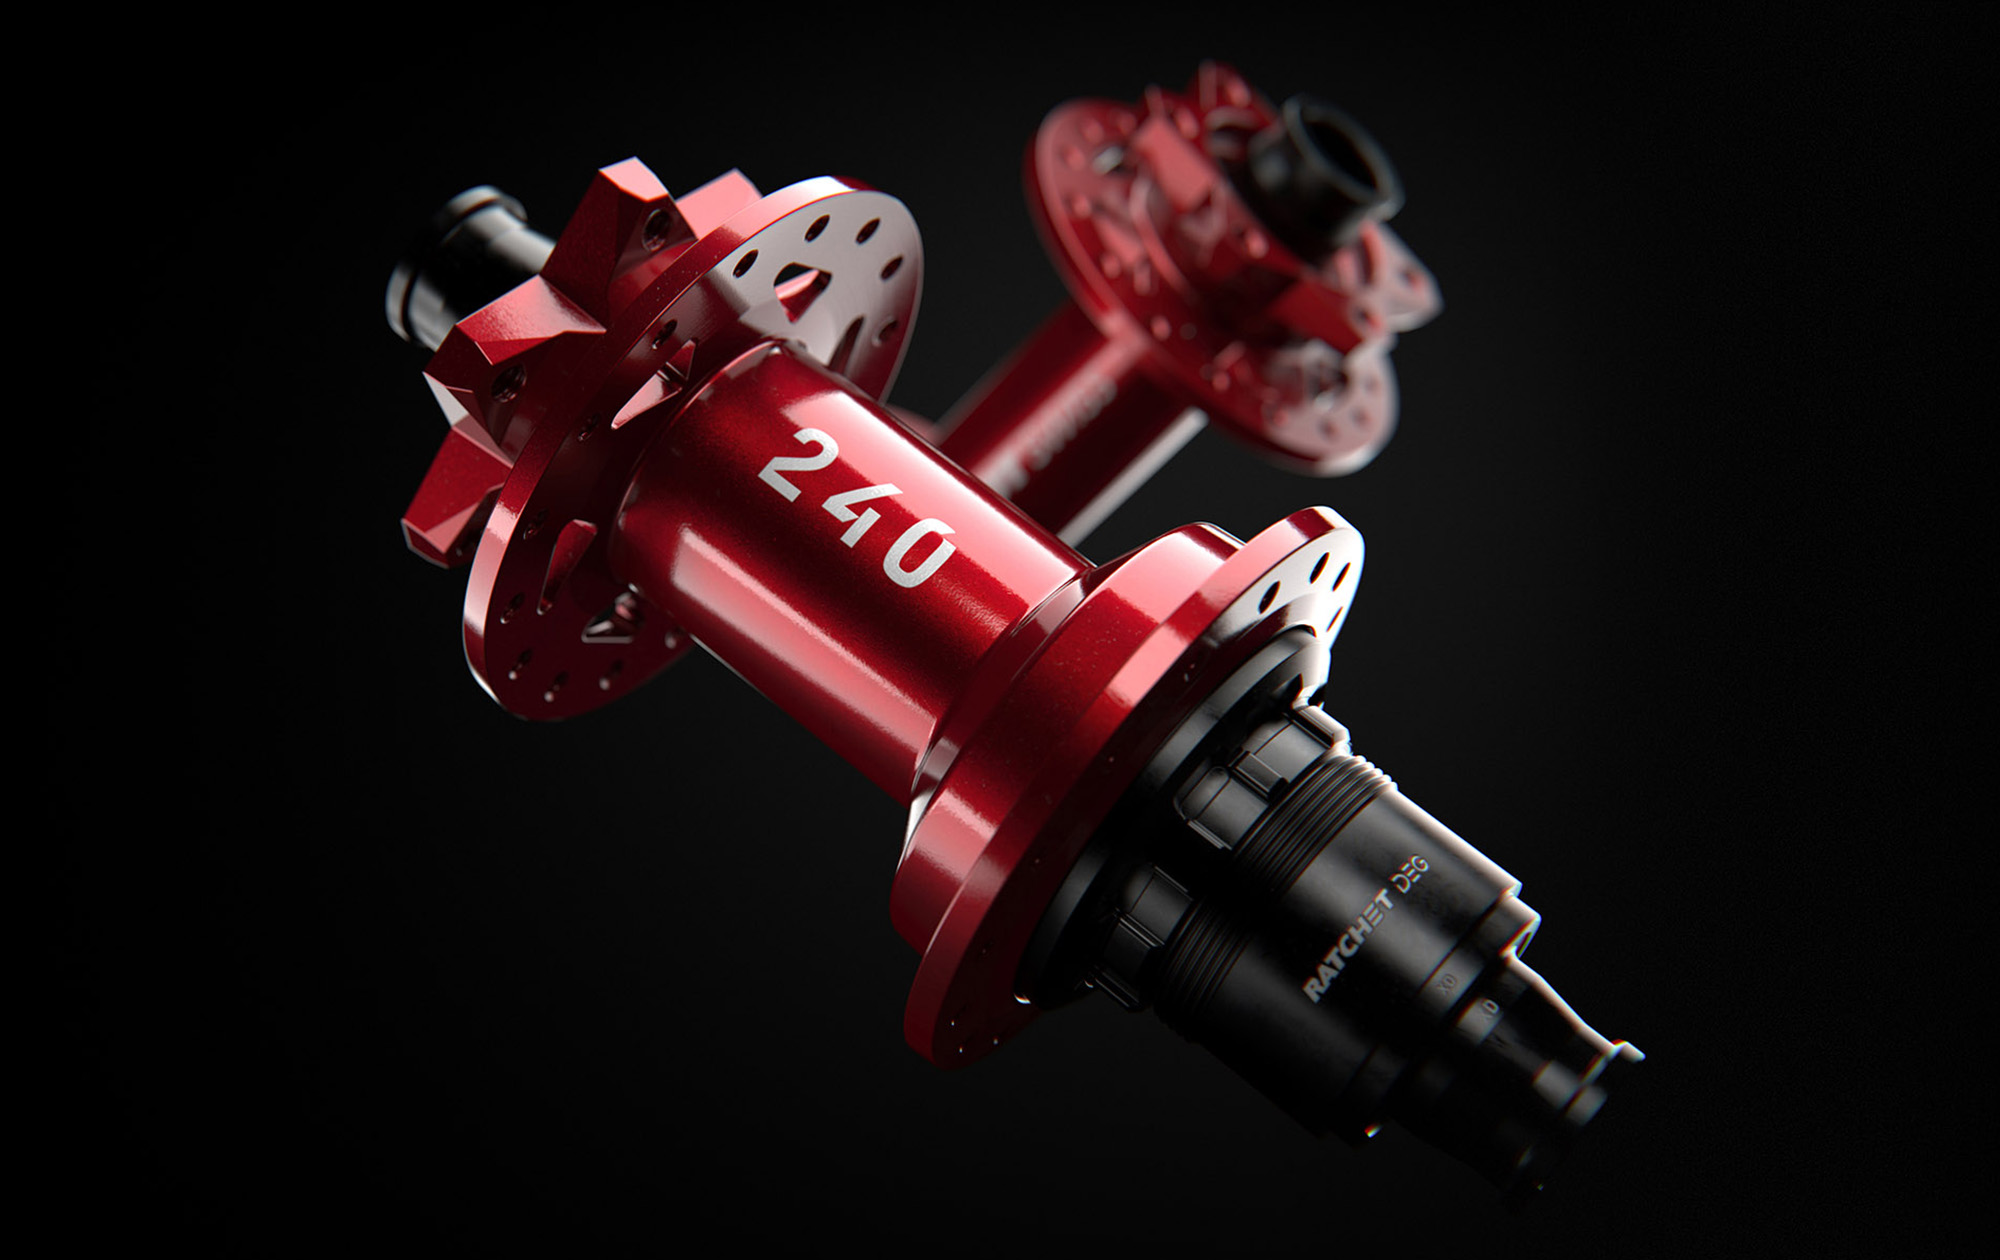 DT Swiss stock image of the new DT Swiss 240 DEG rear hub in a limited edition red colour to celebrate 30 years. 